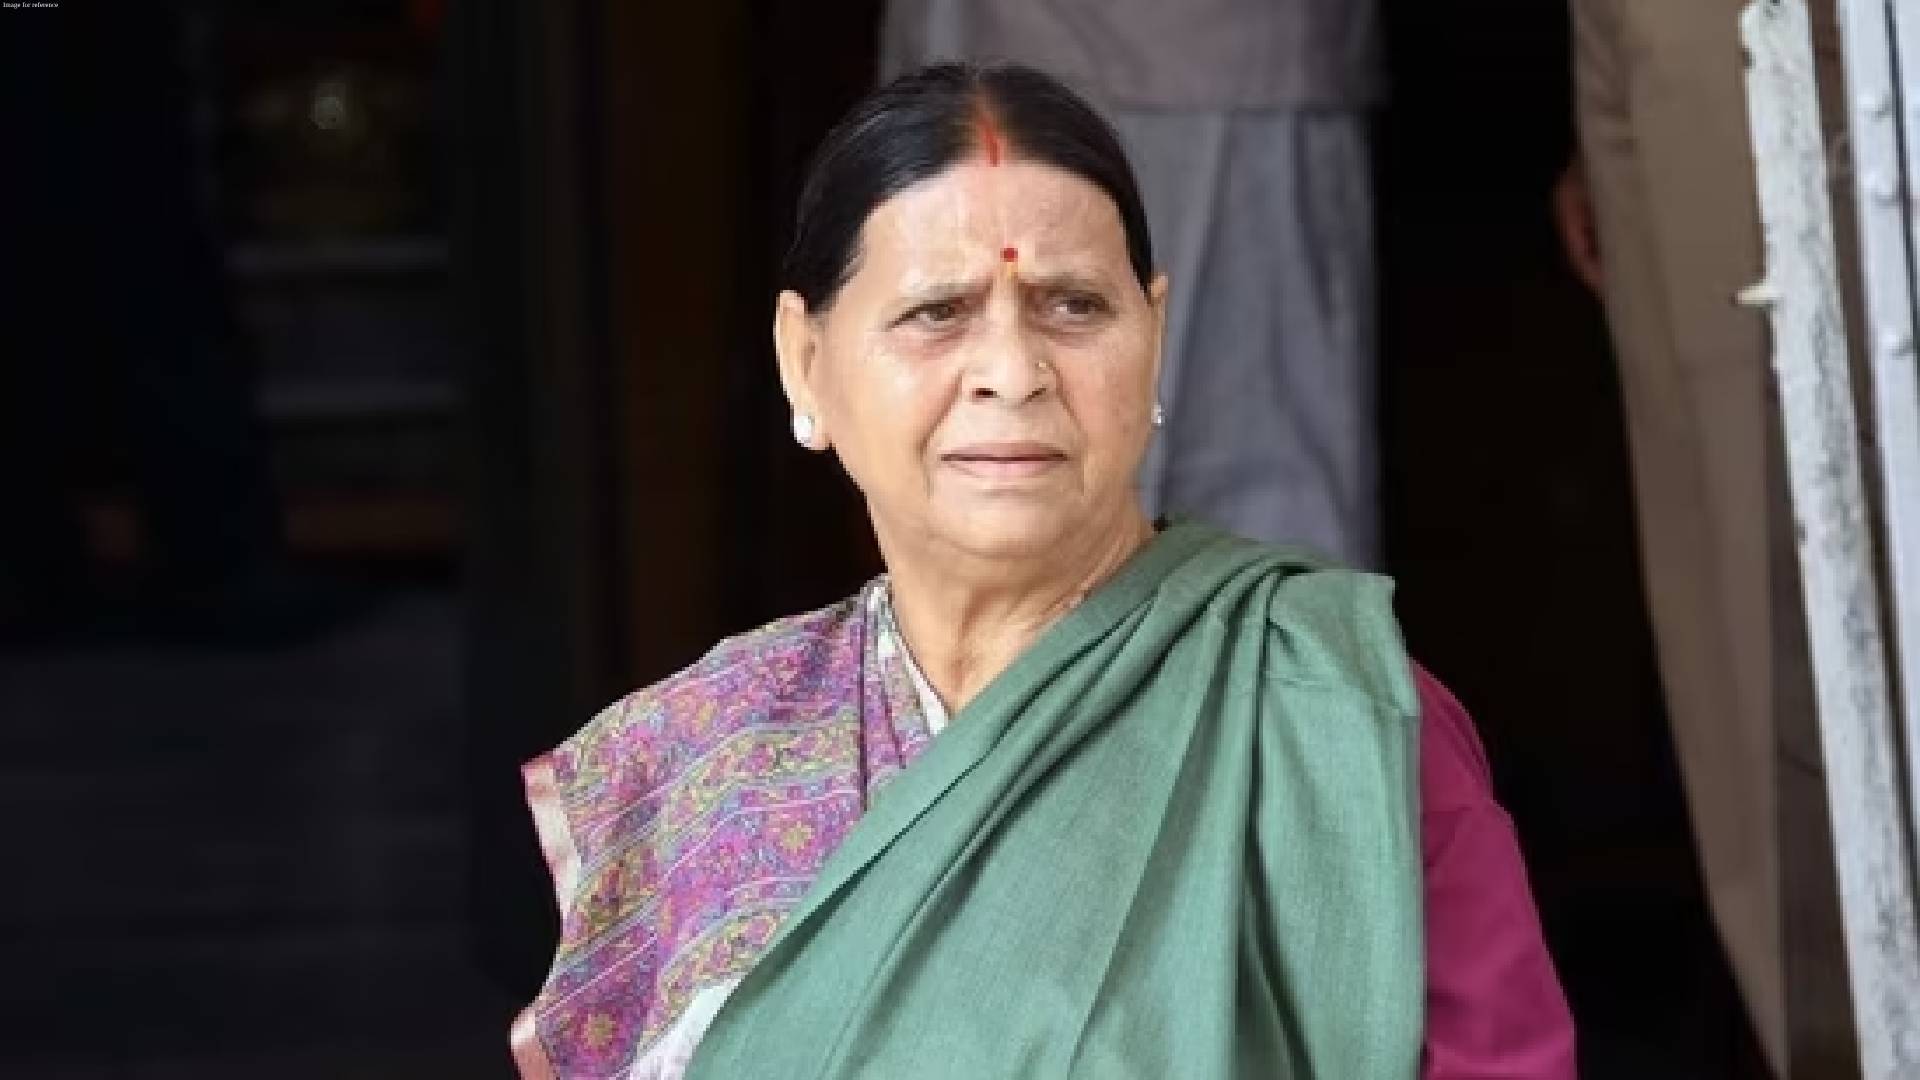 Budget Day: RJD's Rabdi Devi says Rs 26,000 cr support to Bihar for development is 'jhunjhuna'